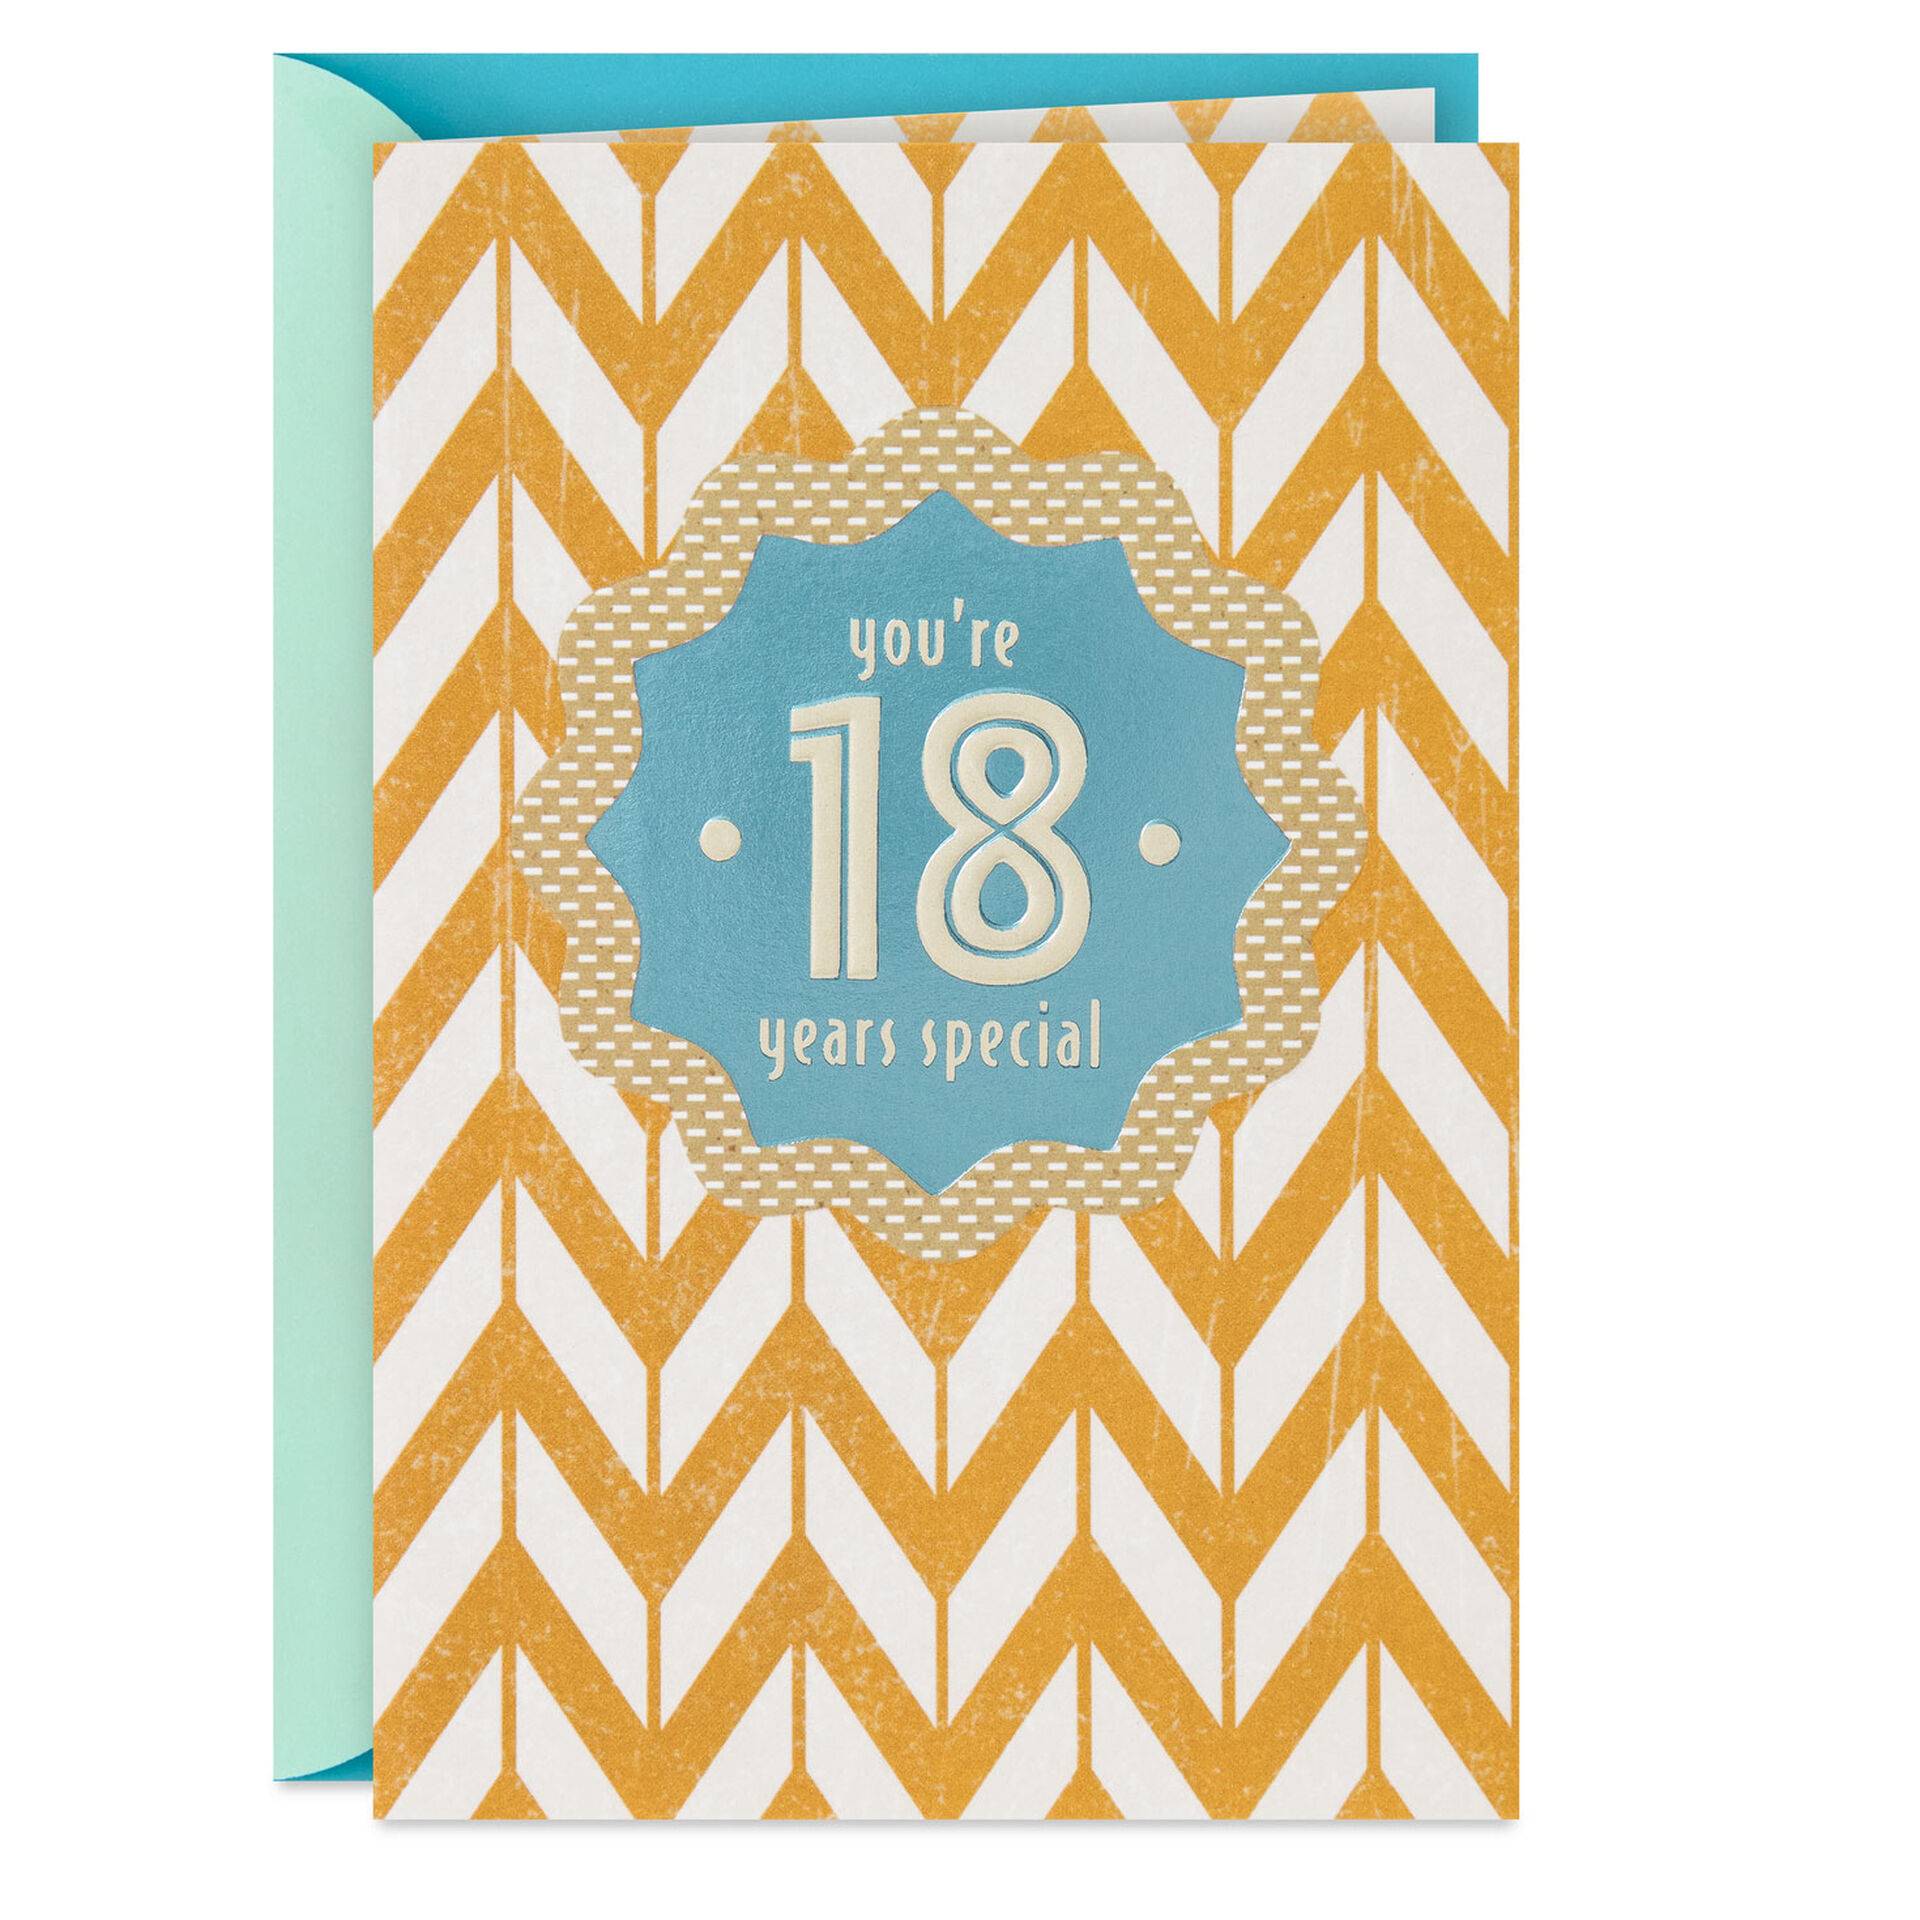 Youre-18-Years-Special-18th-Birthday-Card_359HBD4405_01